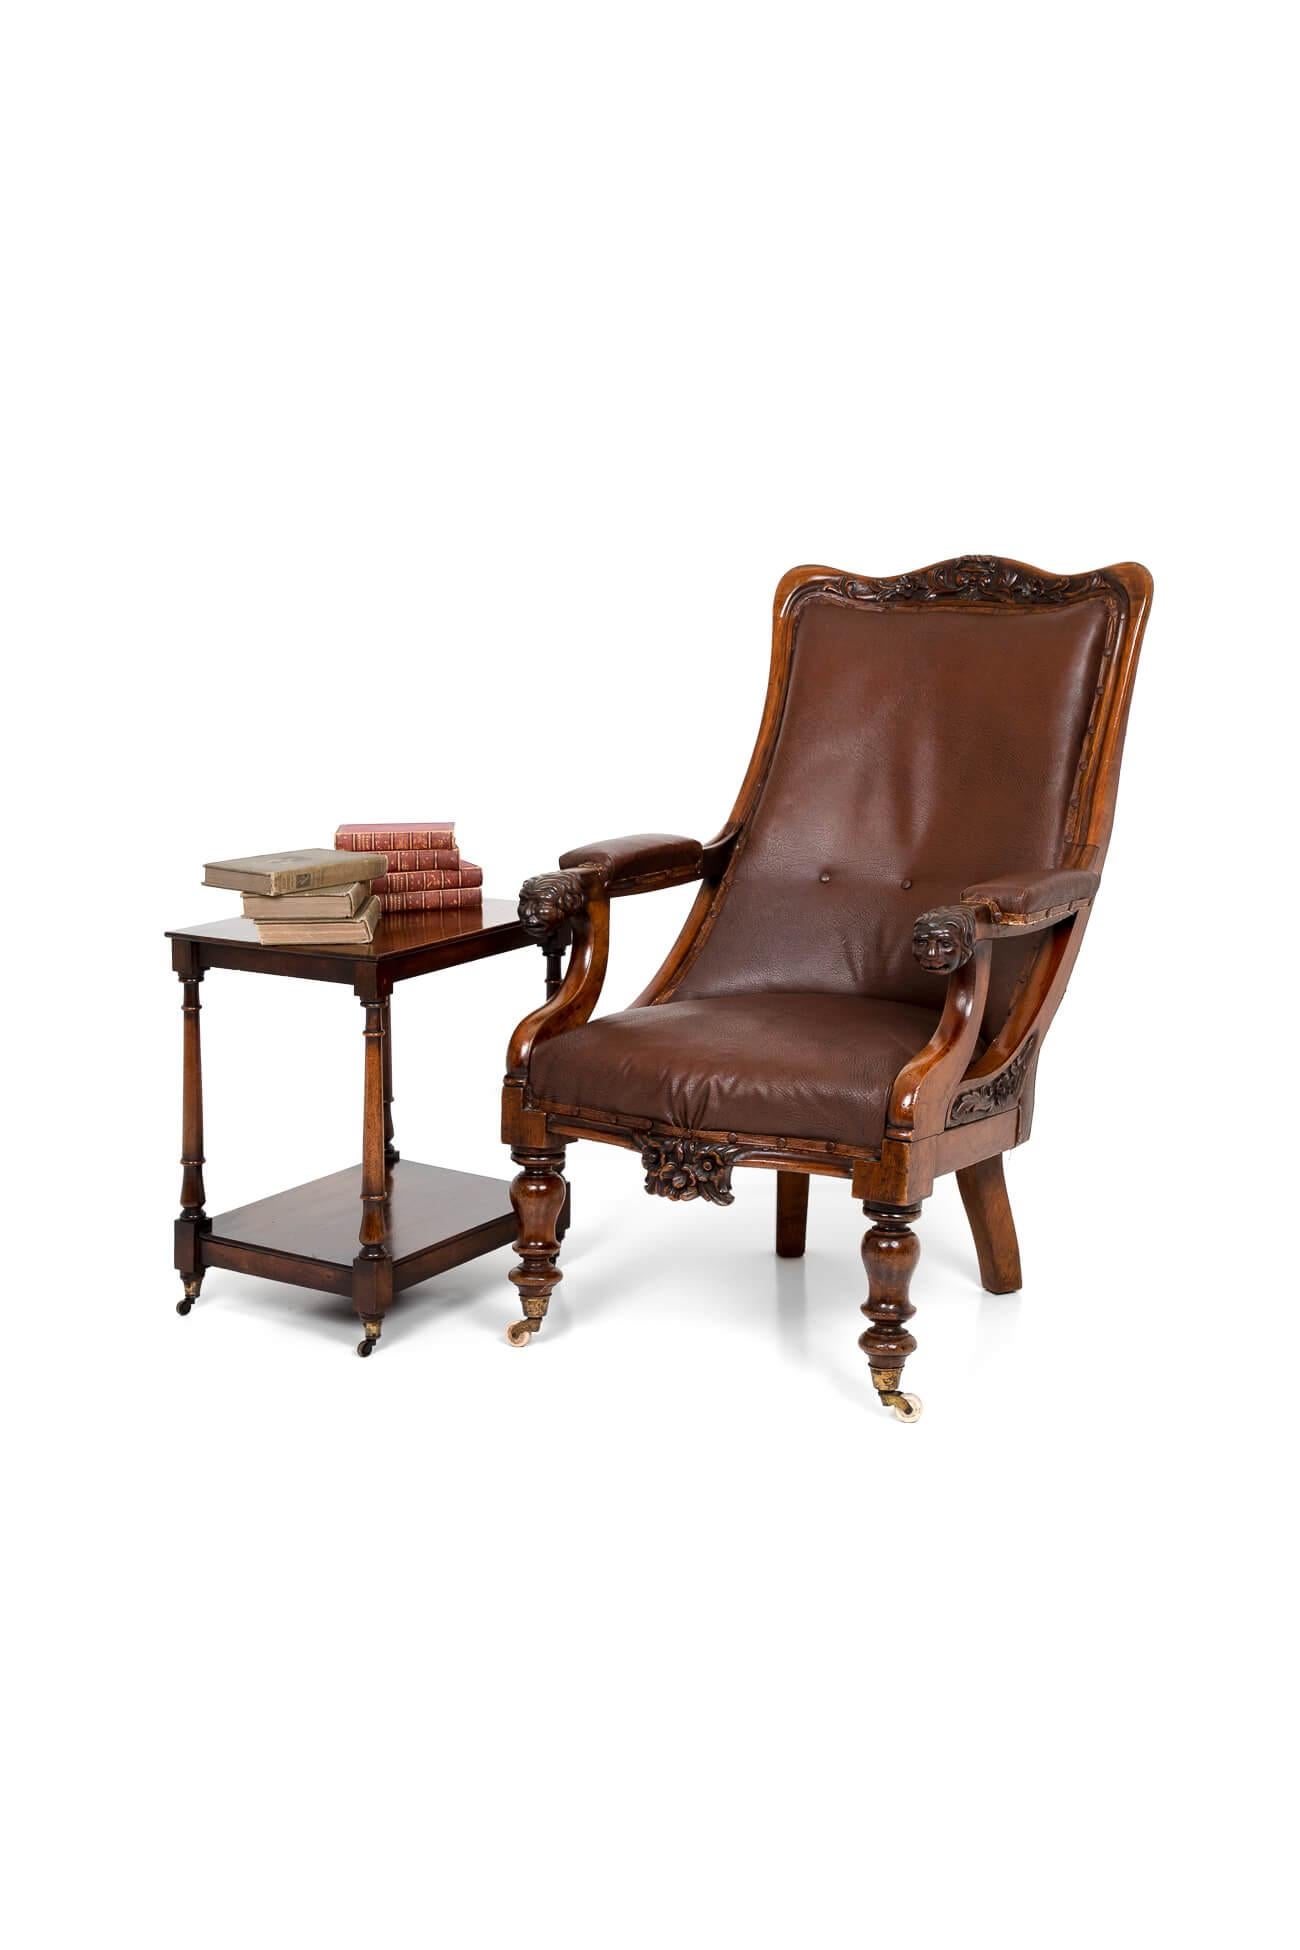 William IV Rosewood in Original Brass Library Armchair, circa 1830 For Sale 3